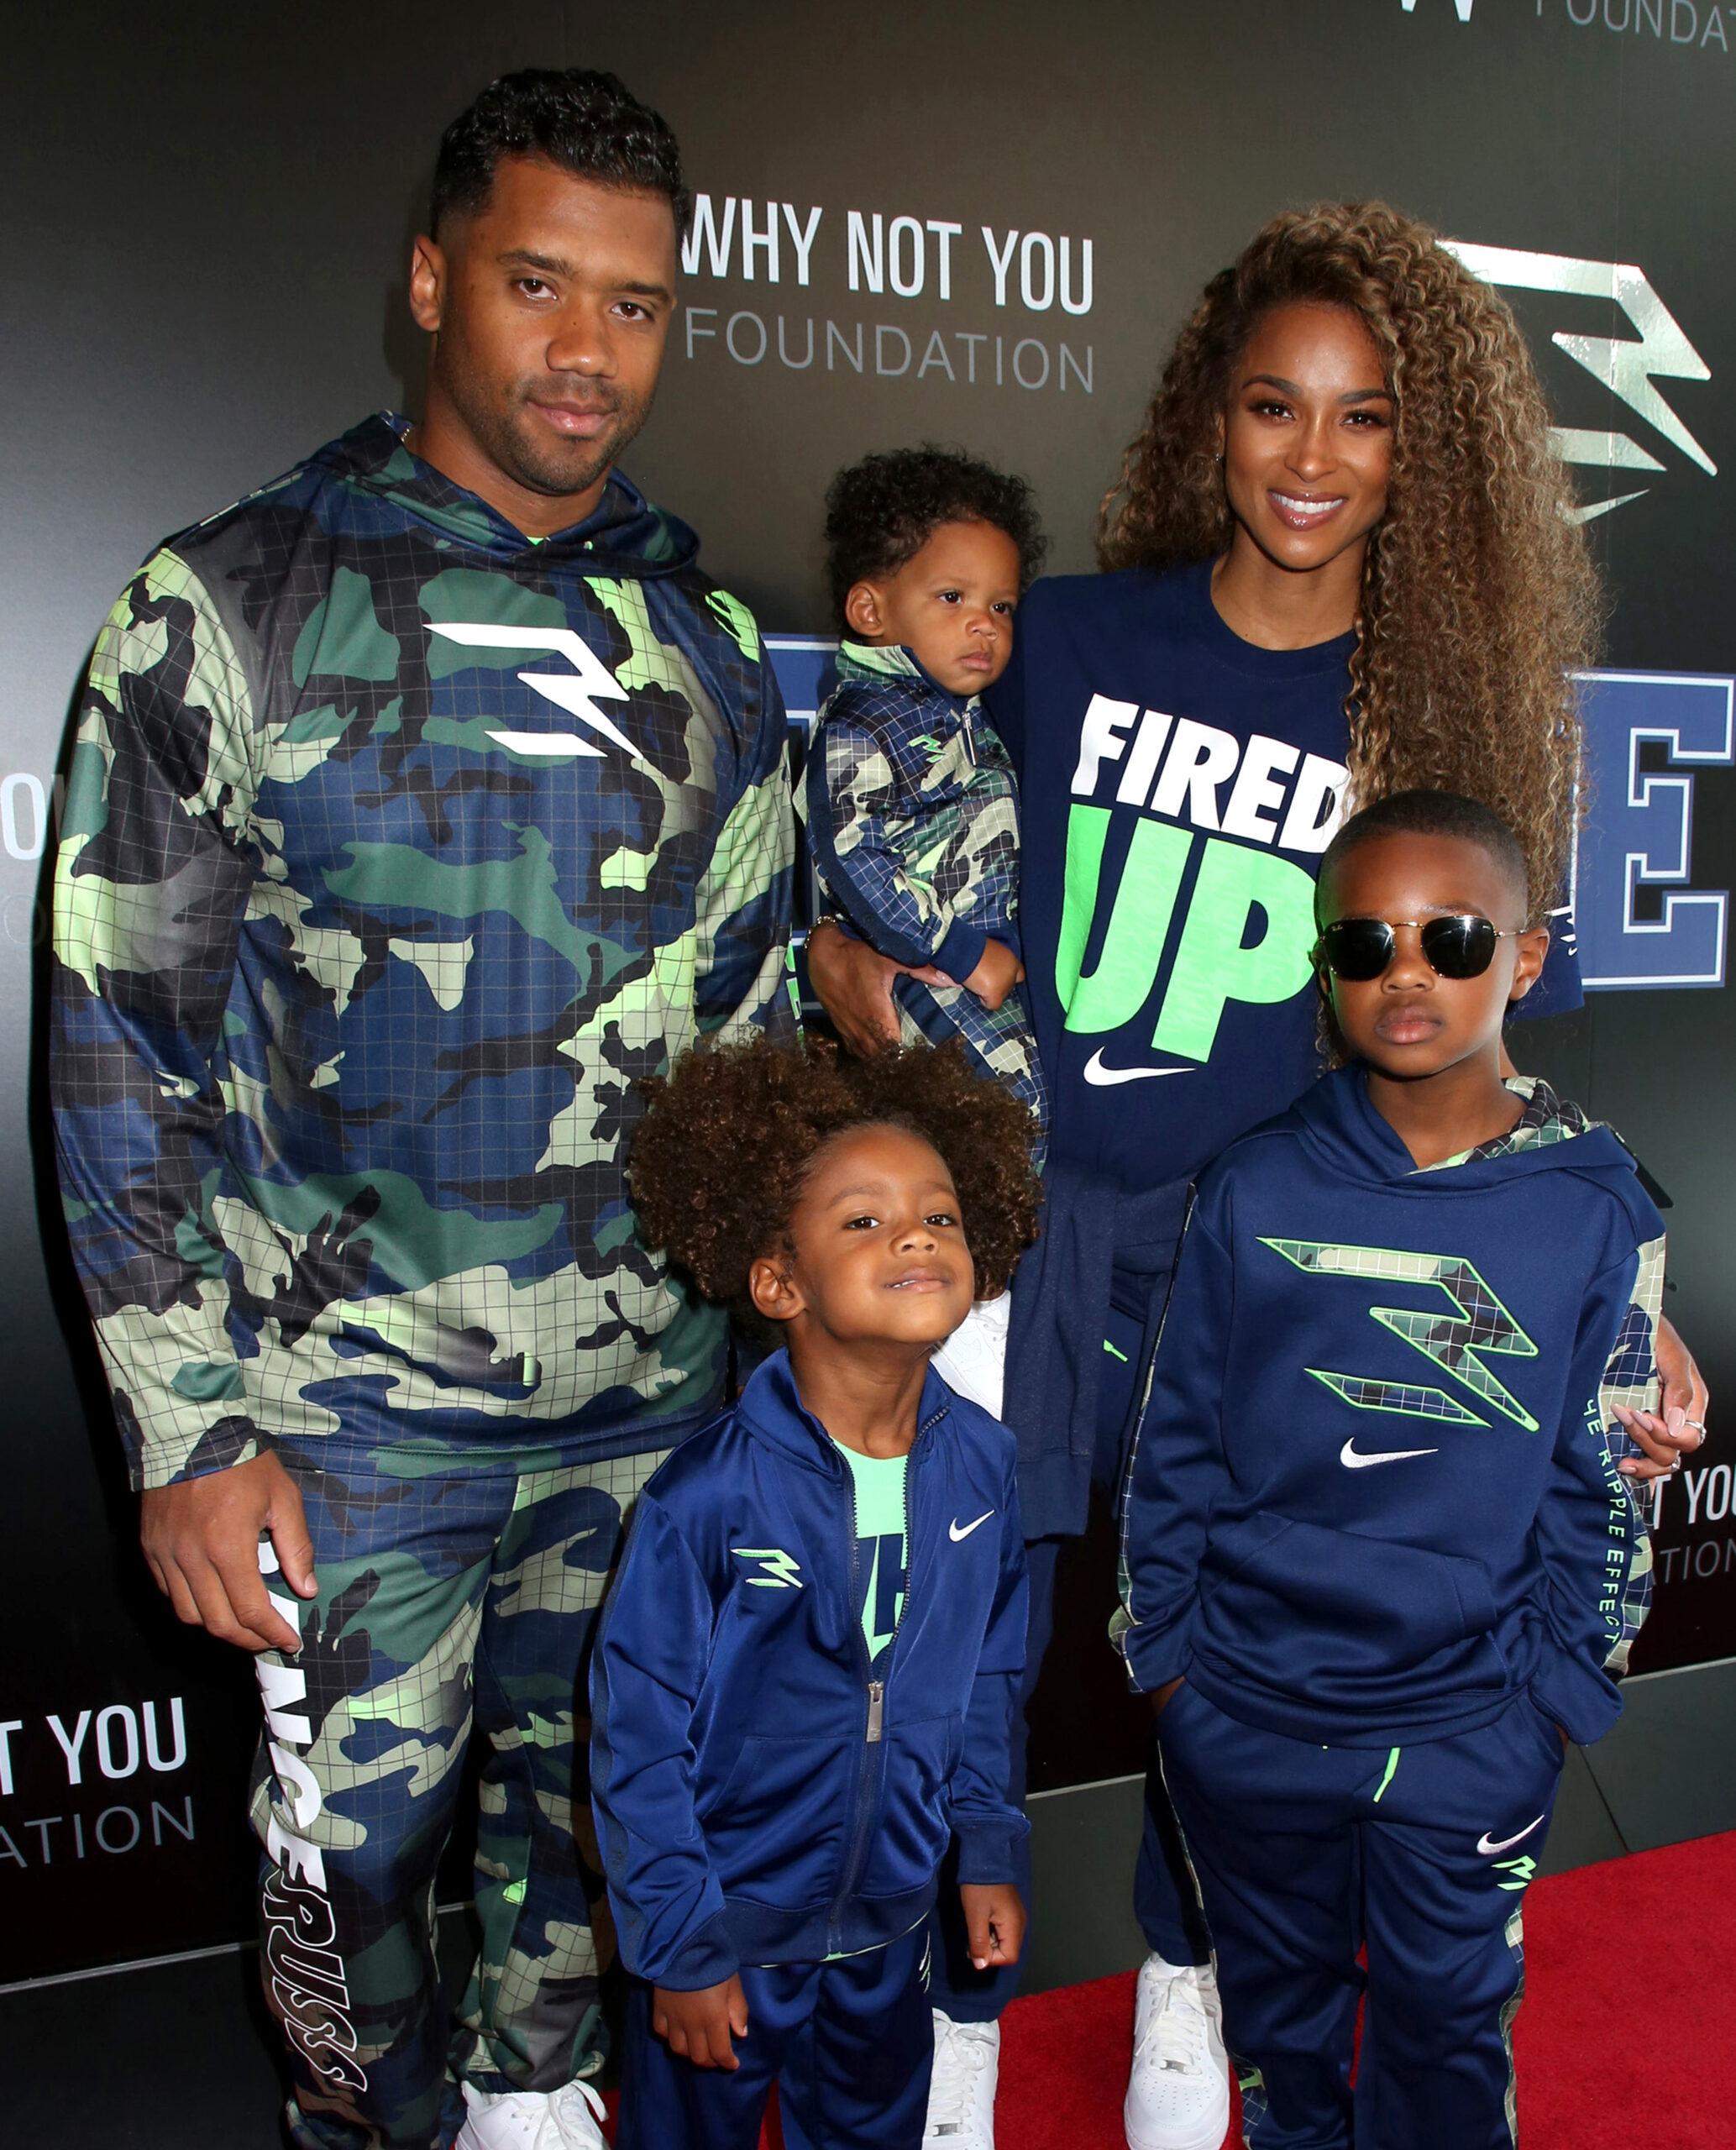 Ciara, Russell Wilson and their kids smiling